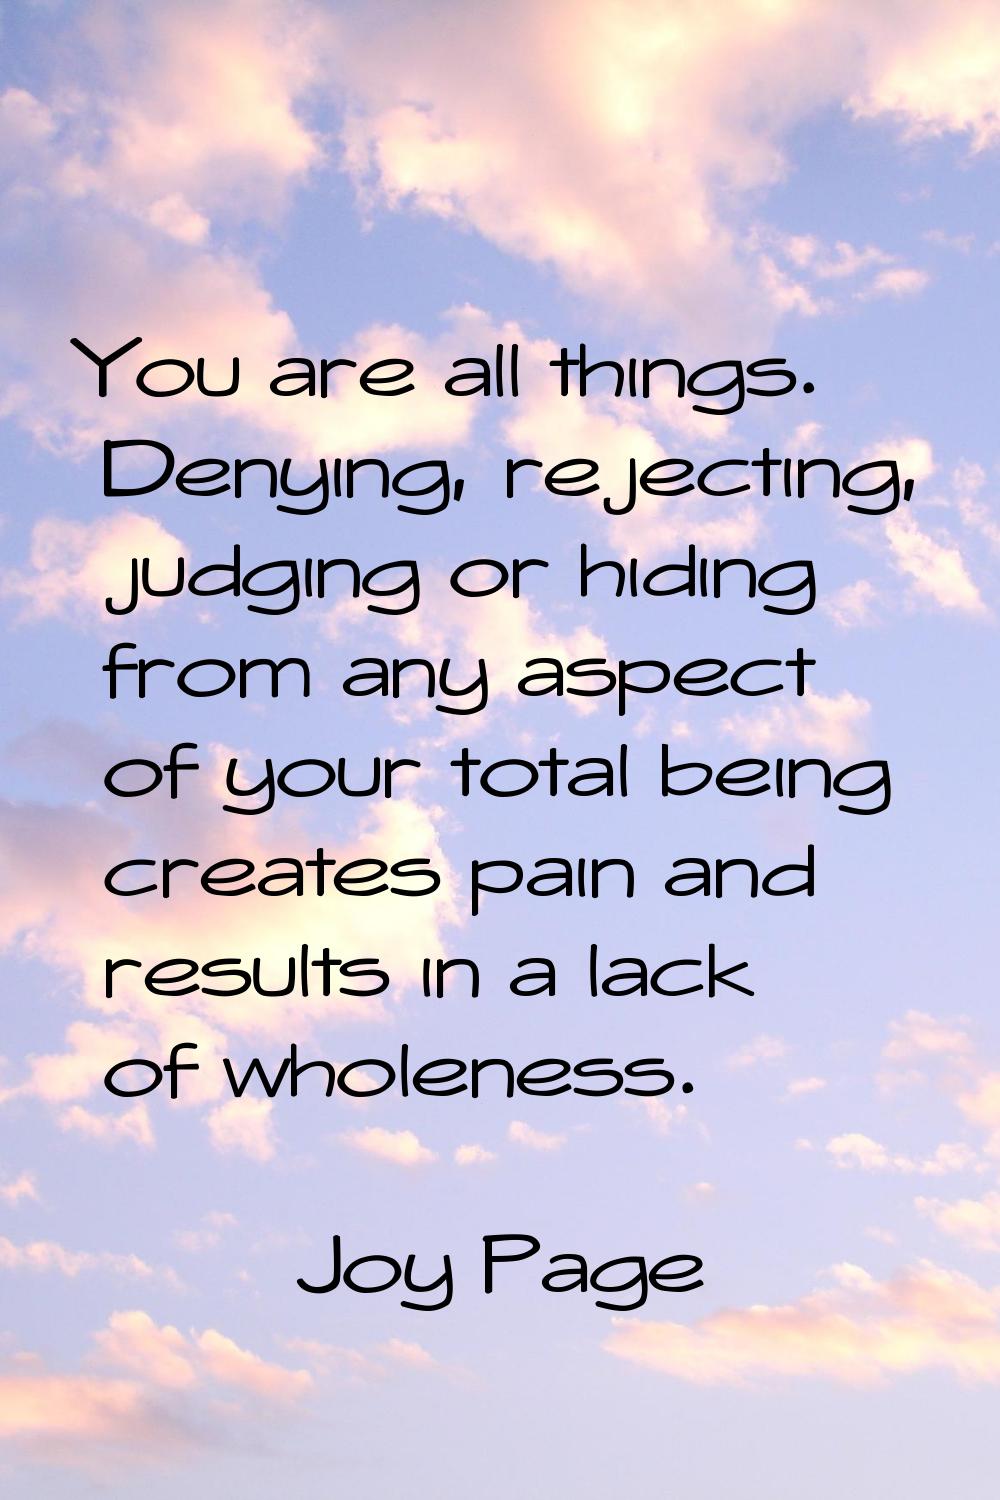 You are all things. Denying, rejecting, judging or hiding from any aspect of your total being creat